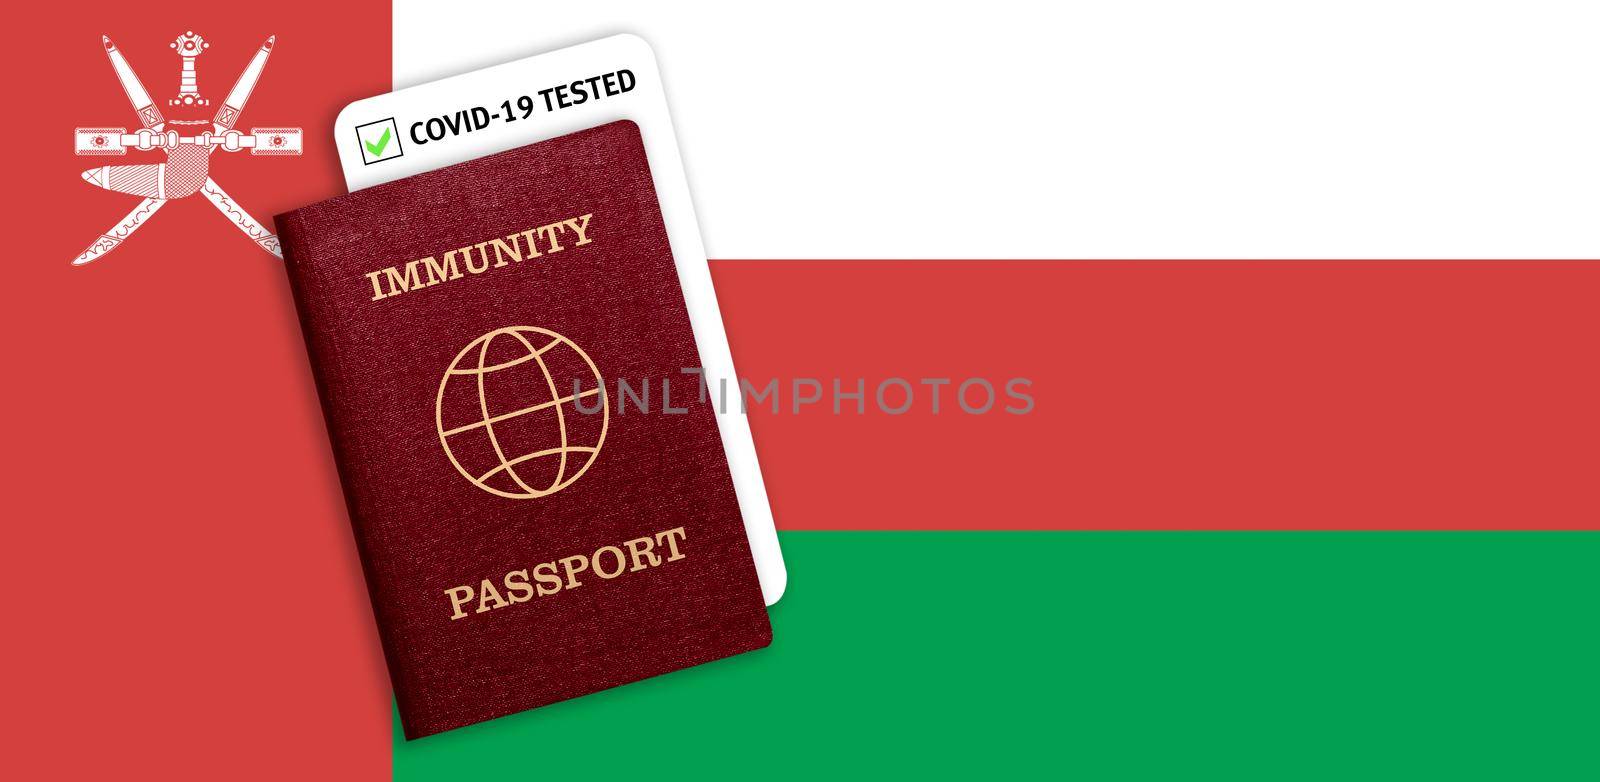 Immunity passport and test result for COVID-19 on flag of Oman by galinasharapova